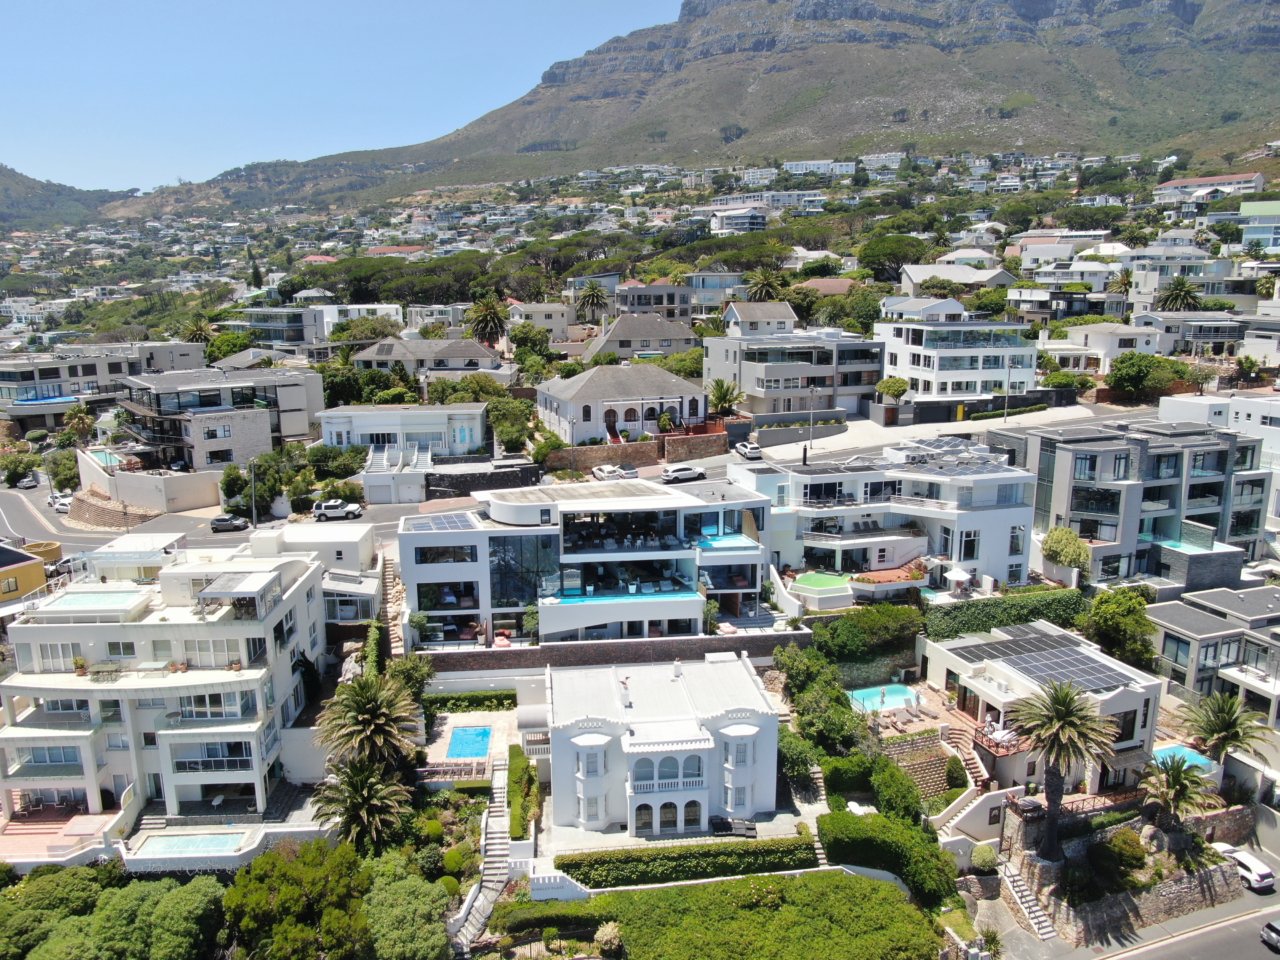 Photo 24 of Camps Bay Beach Villa accommodation in Camps Bay, Cape Town with 4 bedrooms and 4 bathrooms